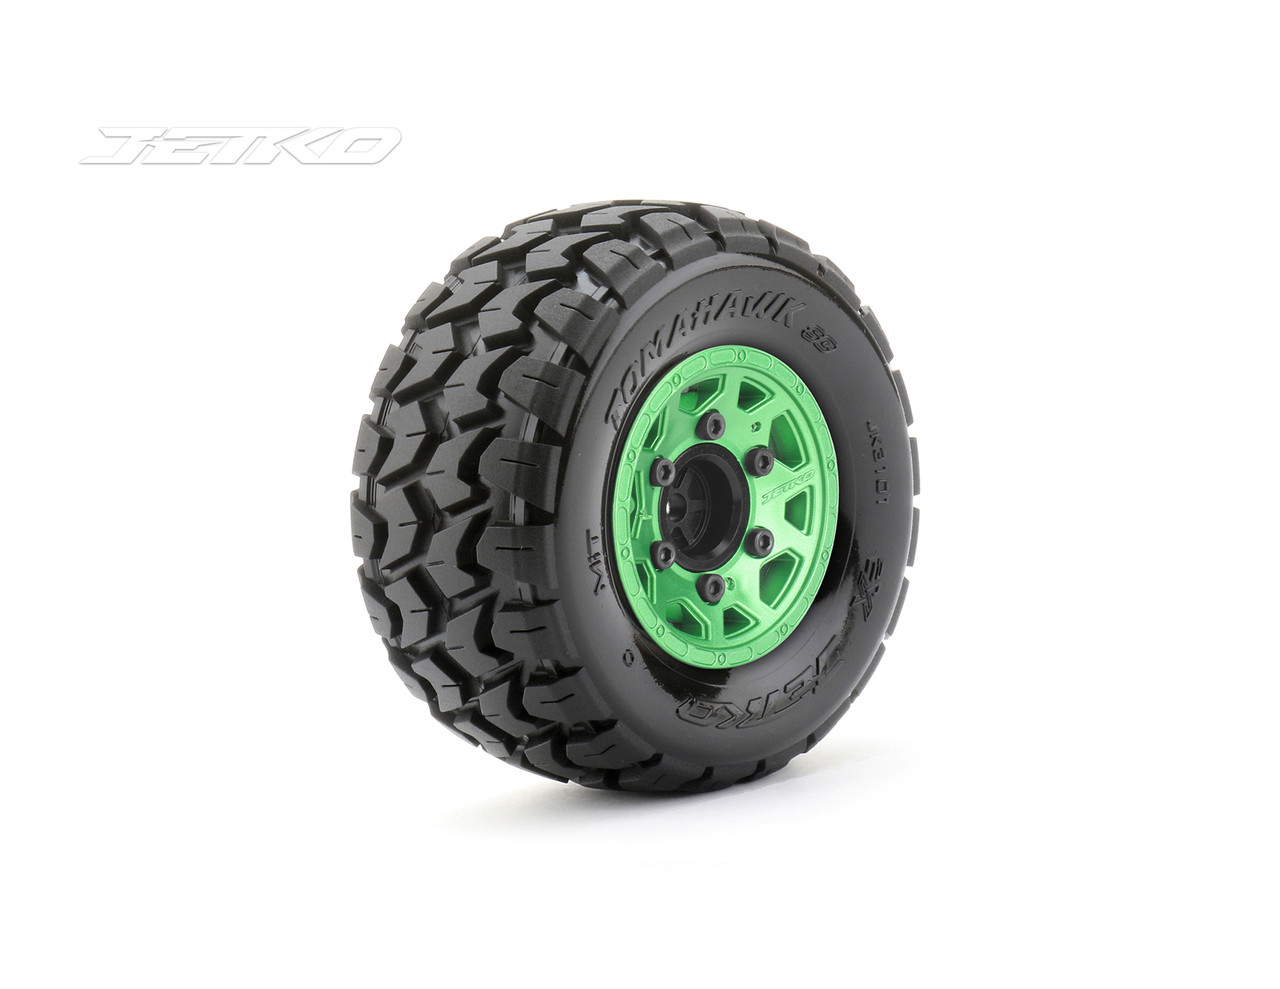 Jetko 1/10 SC EX-Tomahawk Tires Mounted on Green Claw Rims, Medium Soft, Glued, 12mm 1/2" Offset Wide